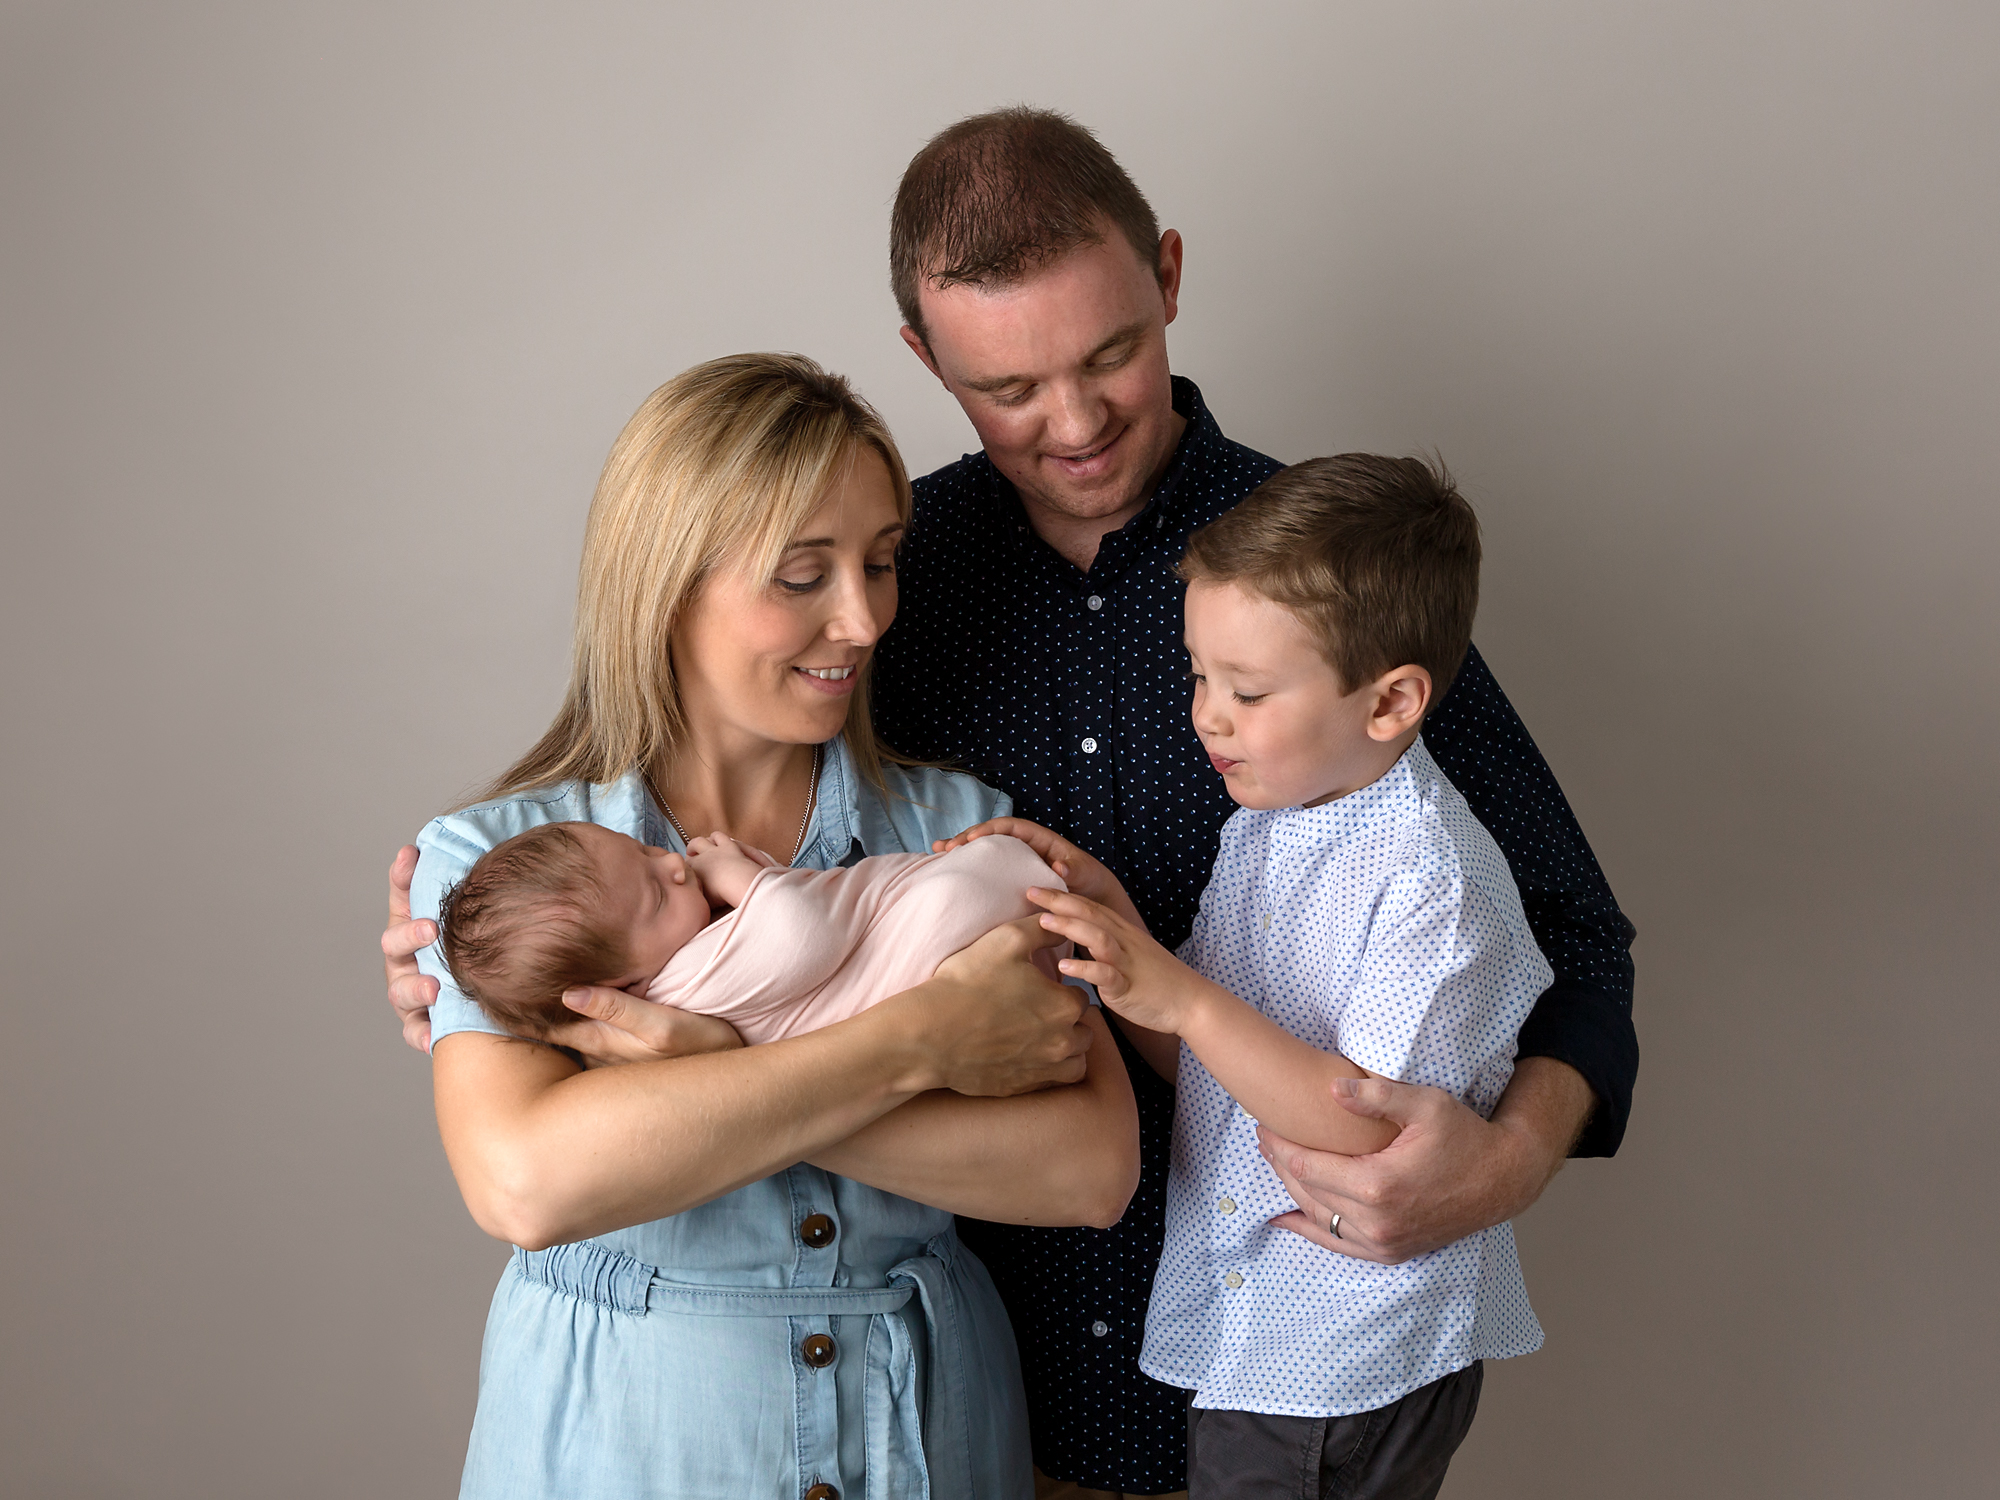 newborn and family photographer south wales, caerphilly, cardiff